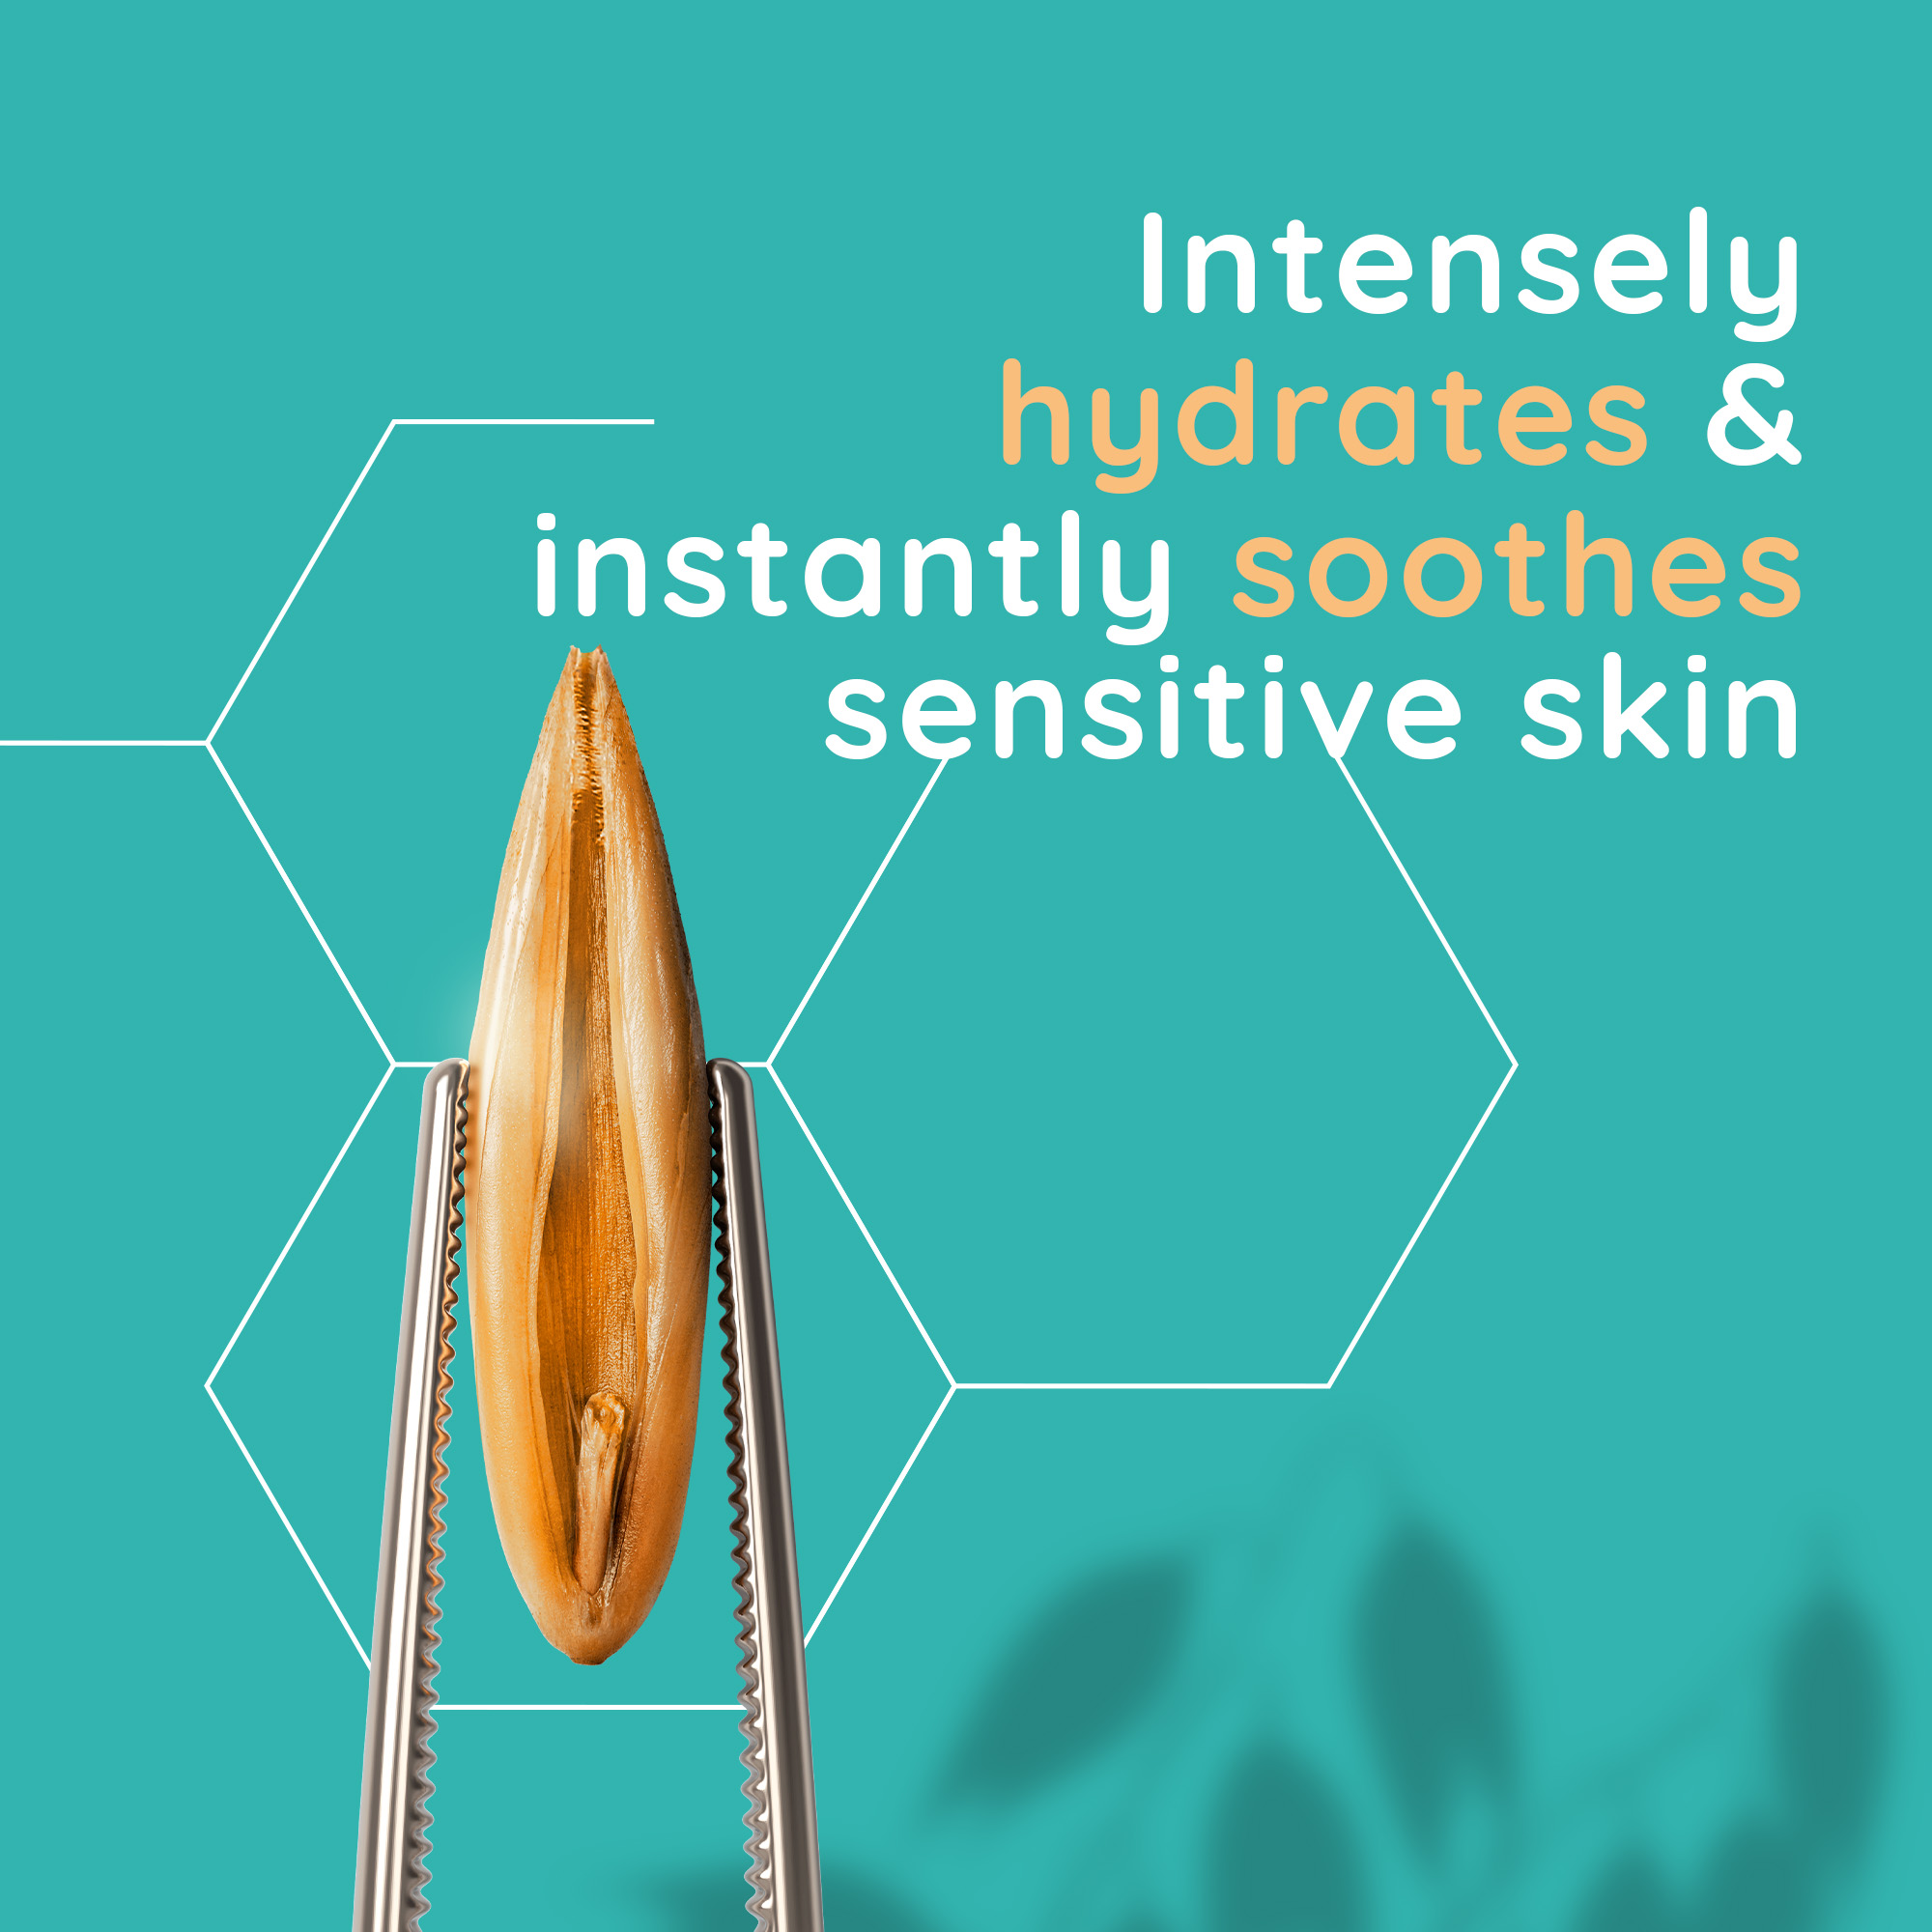 intensely hydrates & instantly soothes sensitive skin